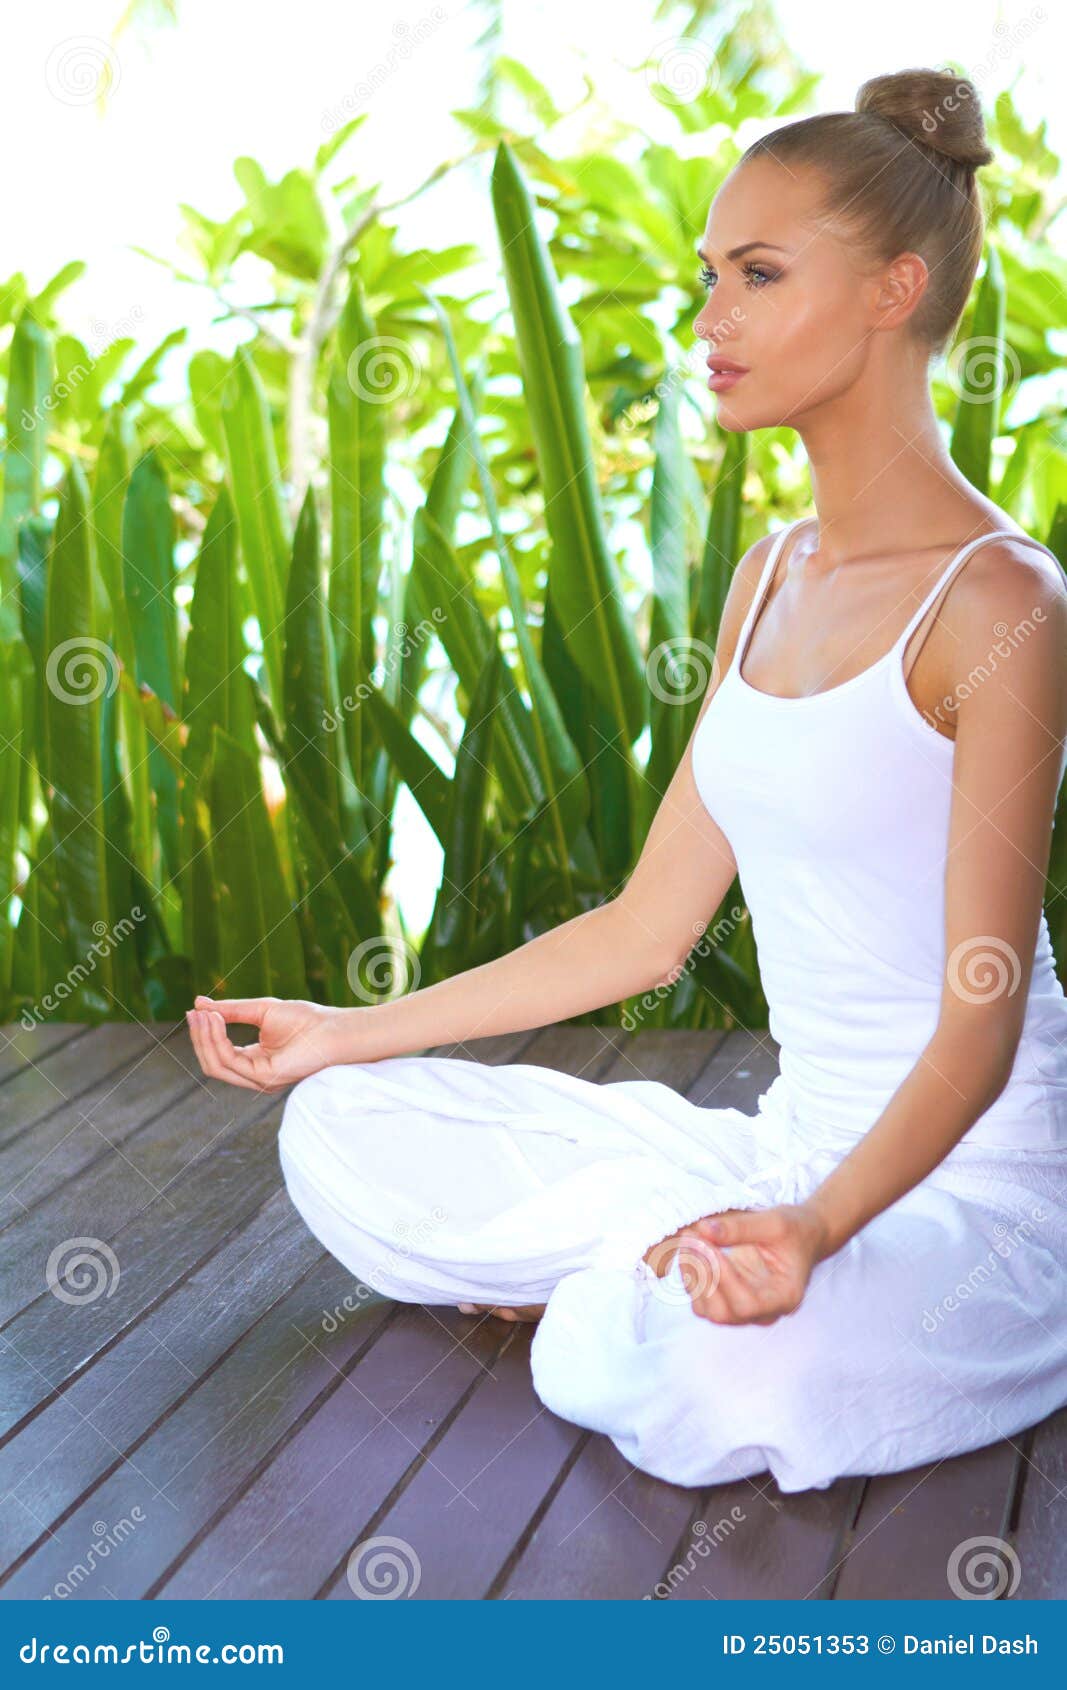 woman in deep contemplation while meditating